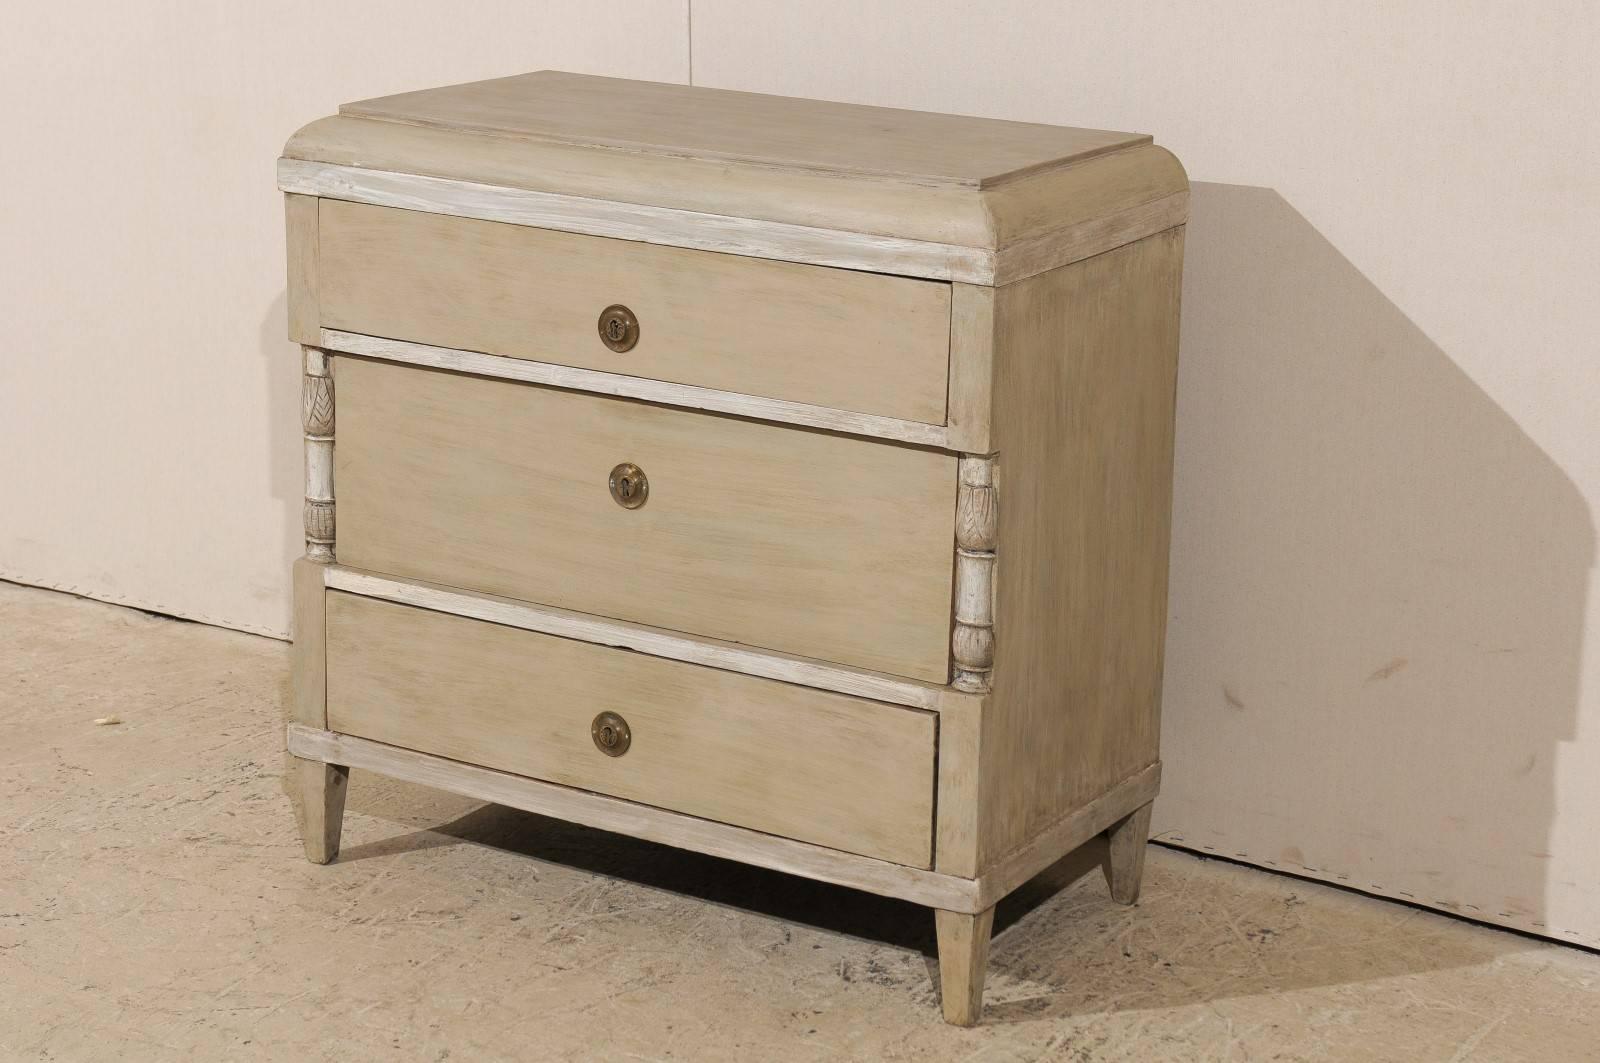 Neoclassical Mid-19th Century Swedish Painted Wood Chest-of-drawers with Lotus Shaped Columns